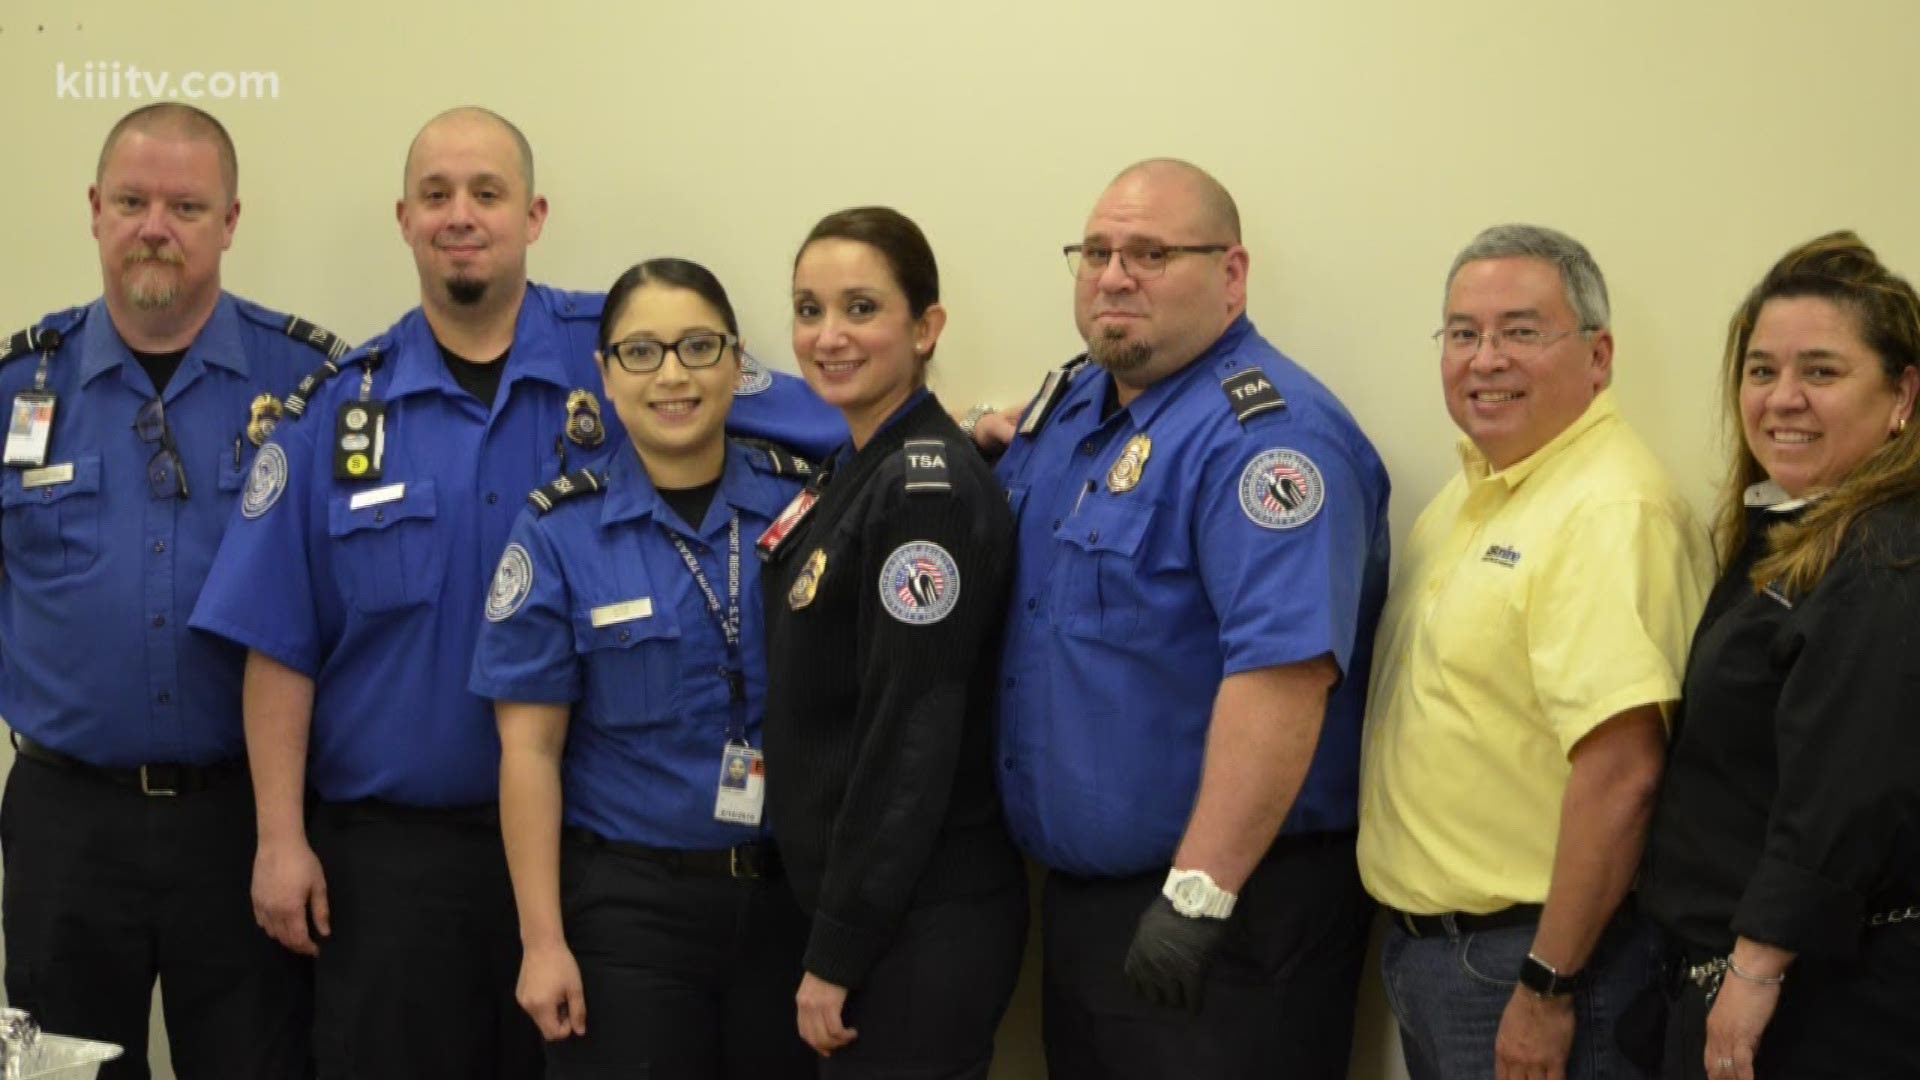 As the partial government shutdown streched into its 28th day Friday, a Corpus Christi-based company decided to give back to some of the TSA workers at hte Corpus Christi International Airport.